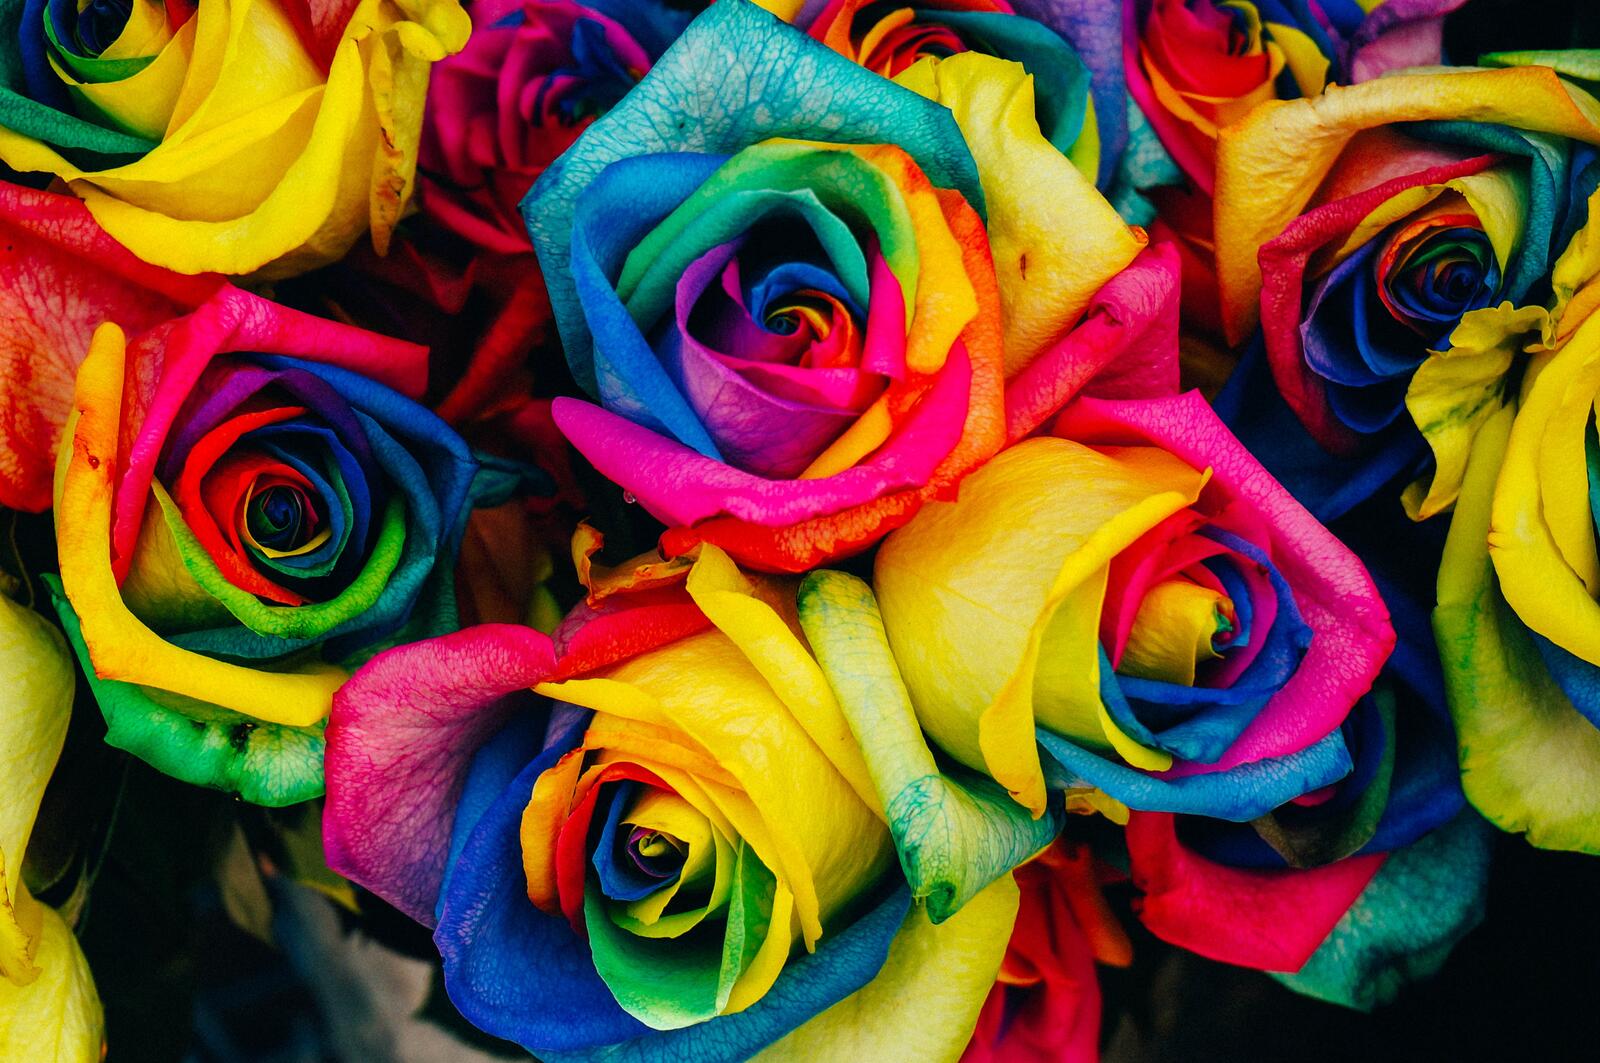 Free photo A picture of colorful roses